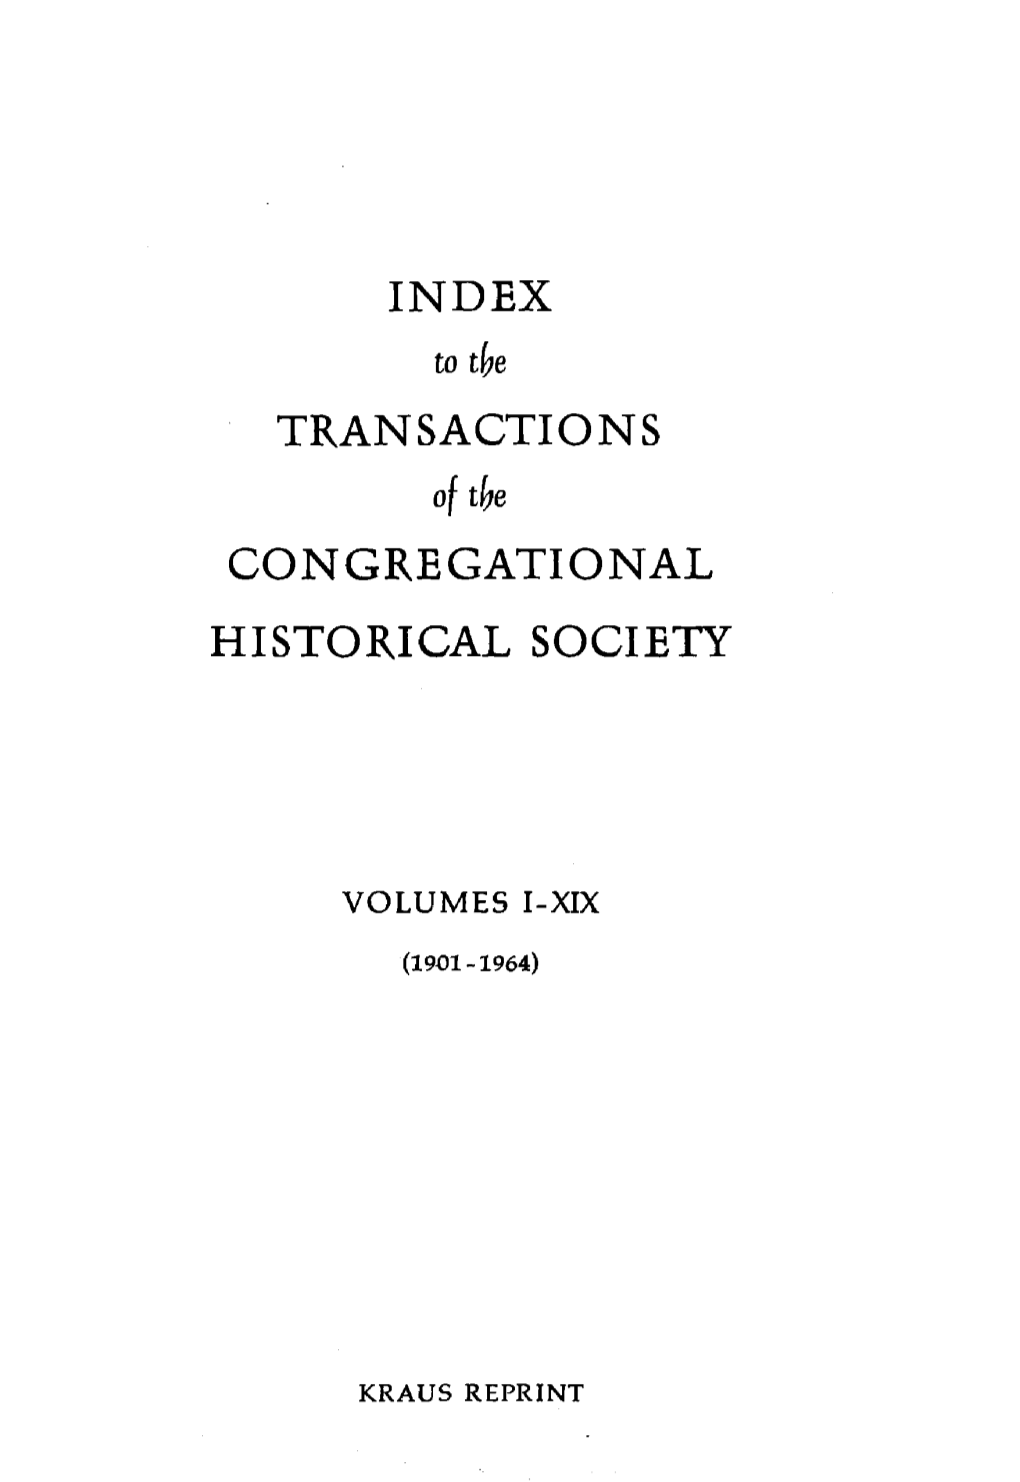 INDEX TRANSACTIONS of Tbe CONGREGATIONAL HISTORICAL